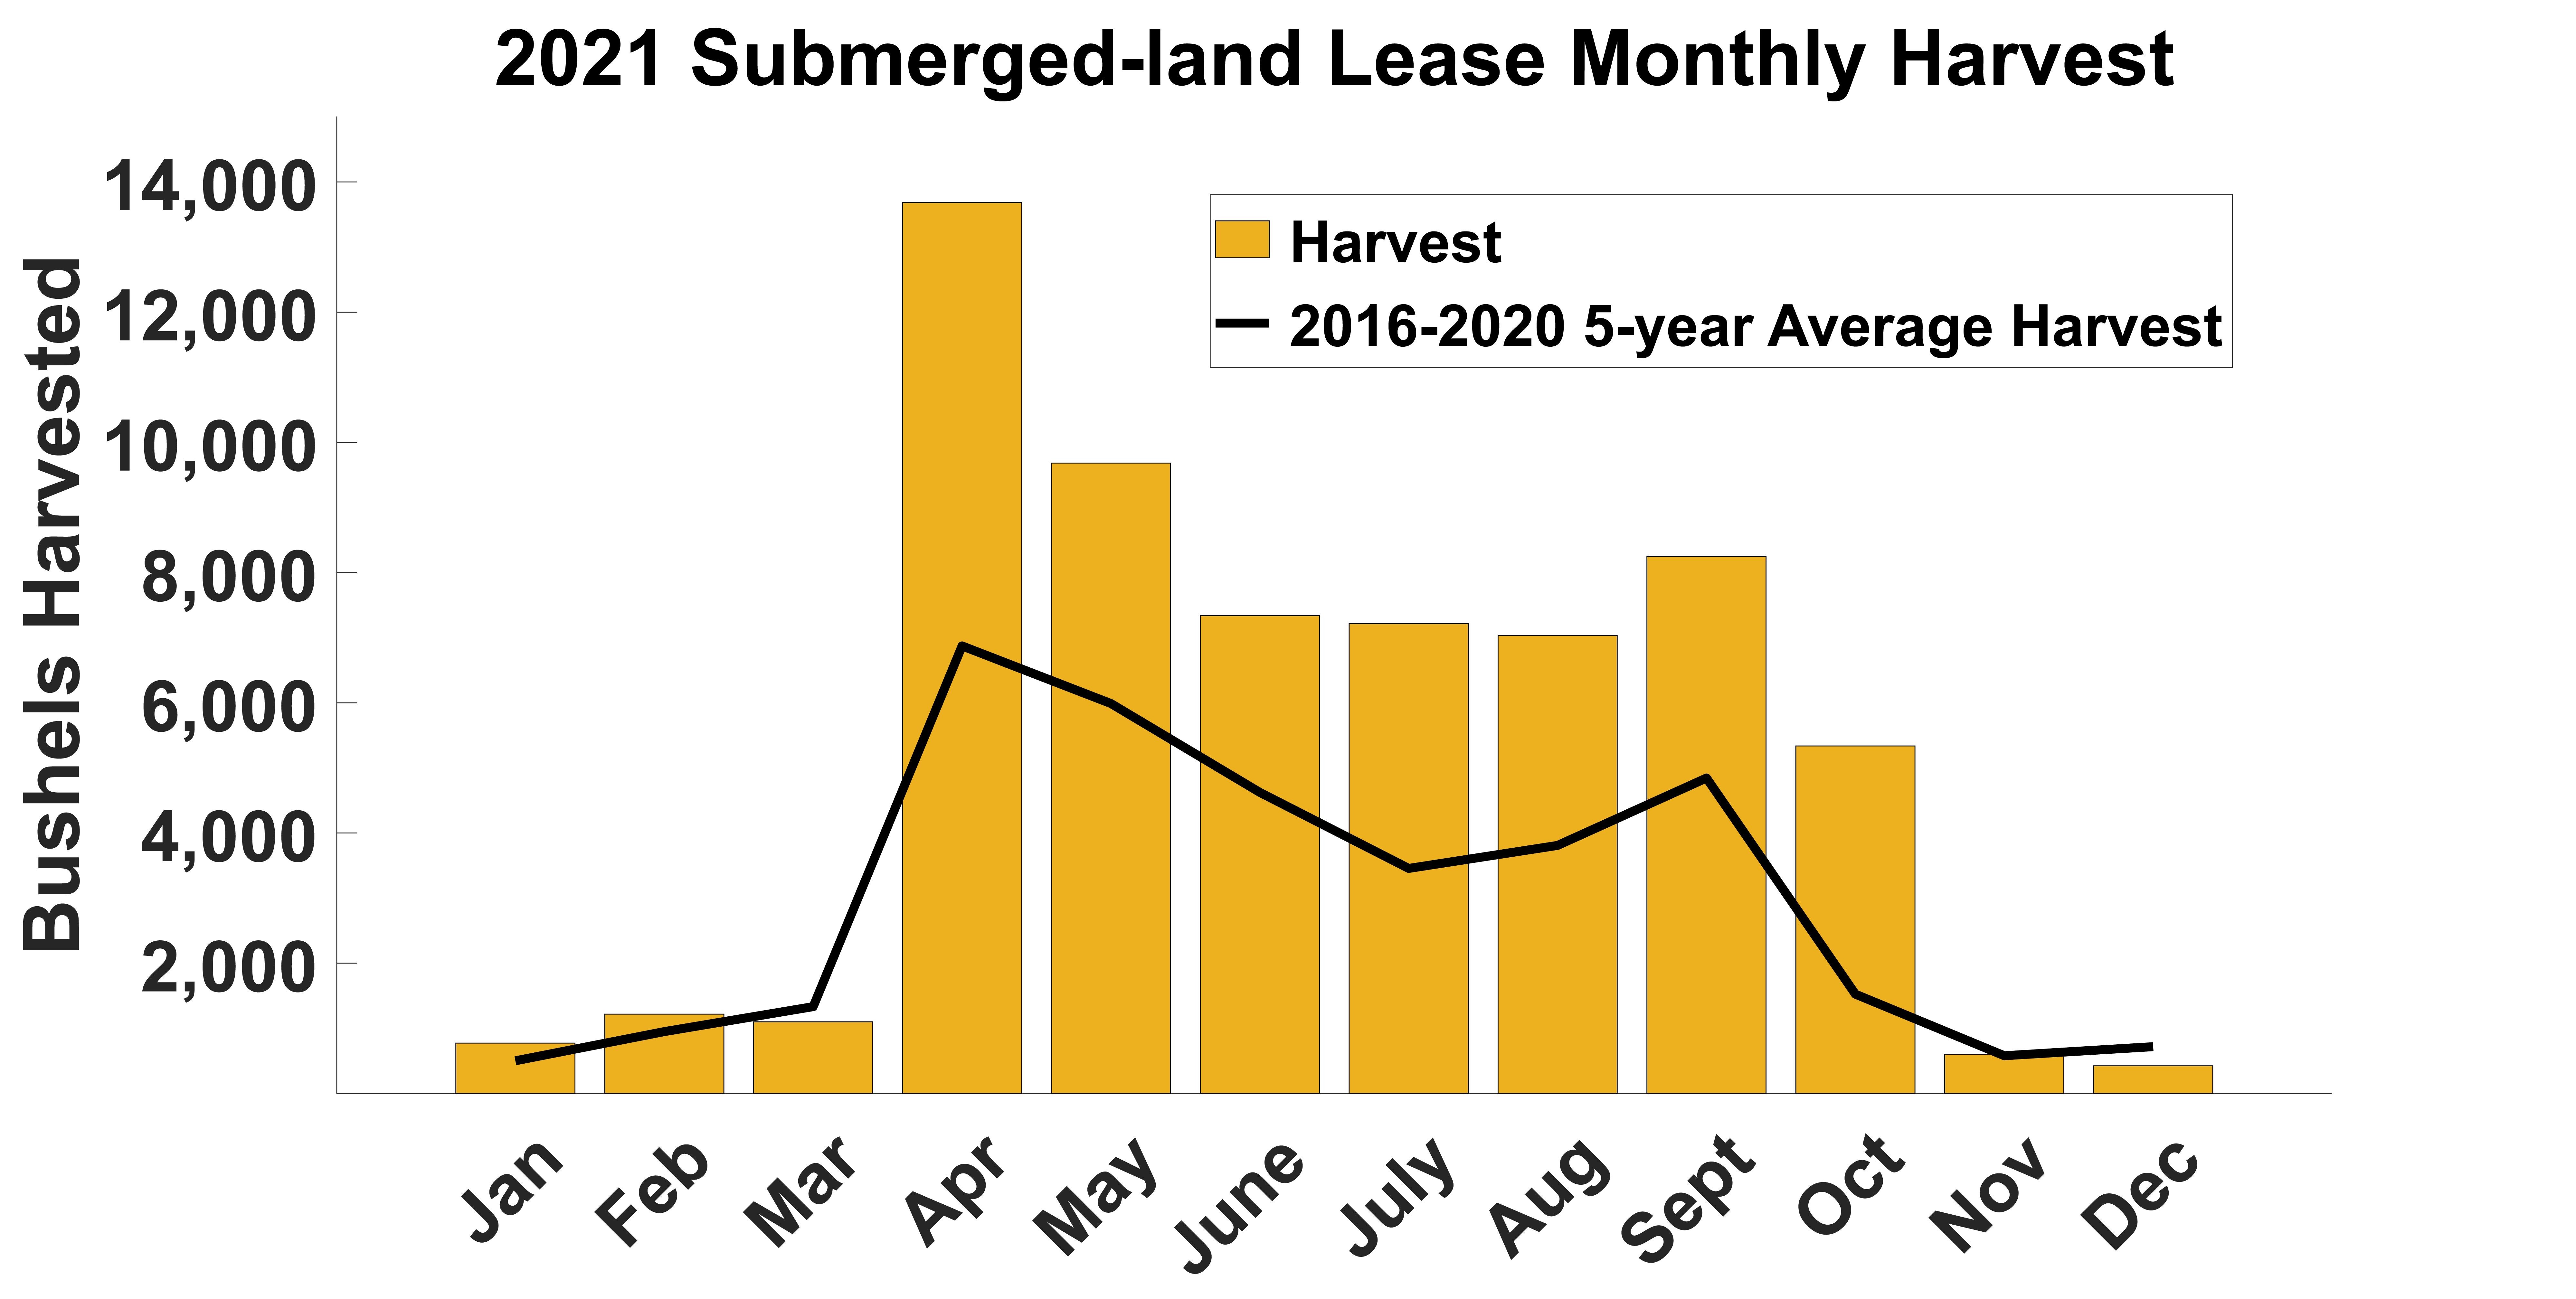 2021 monthly oyster harvest submerged-land leases in Maryland bar graph.